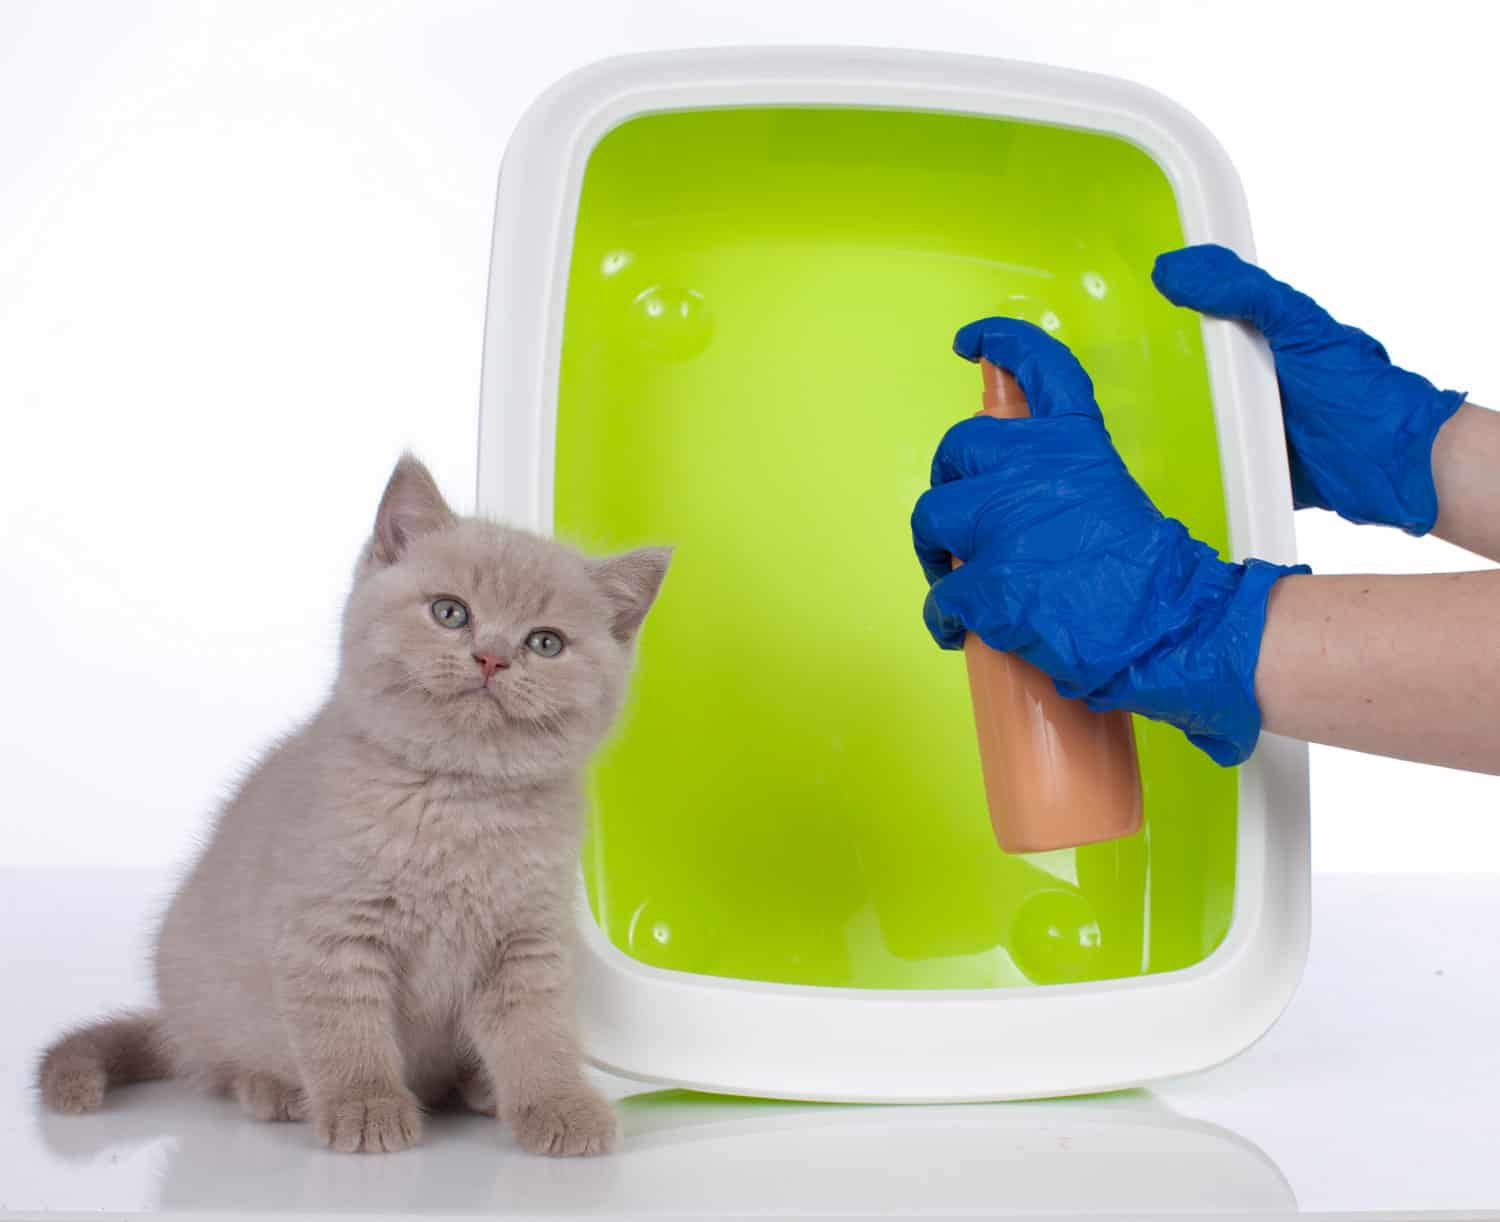 cat tlitterbox with cat aside and hands cleaning with spray